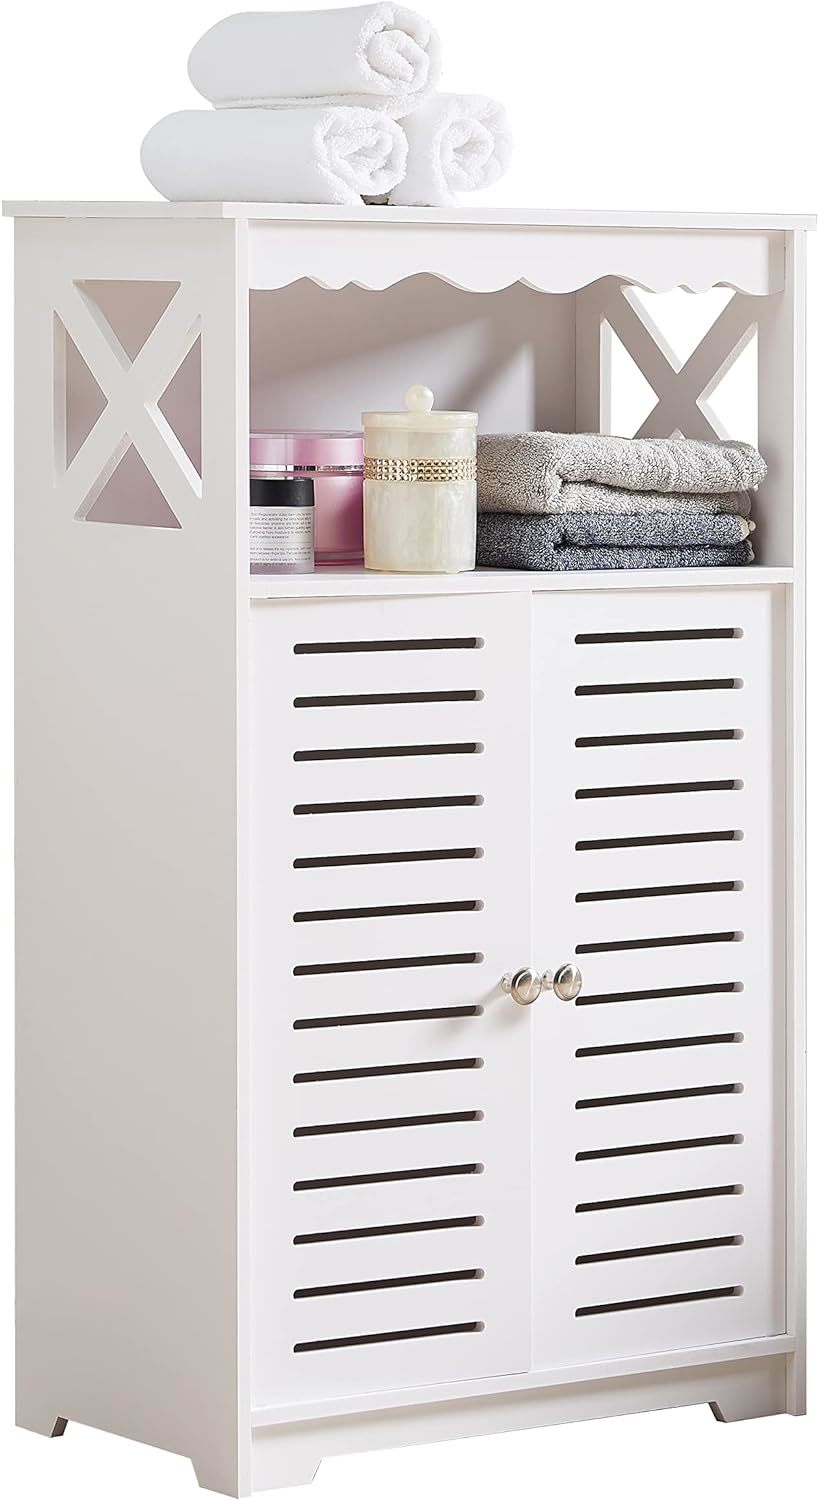 Primary image for The Carol Wood Bathroom Floor Storage Cabinet, White, Is A Product Of Kings